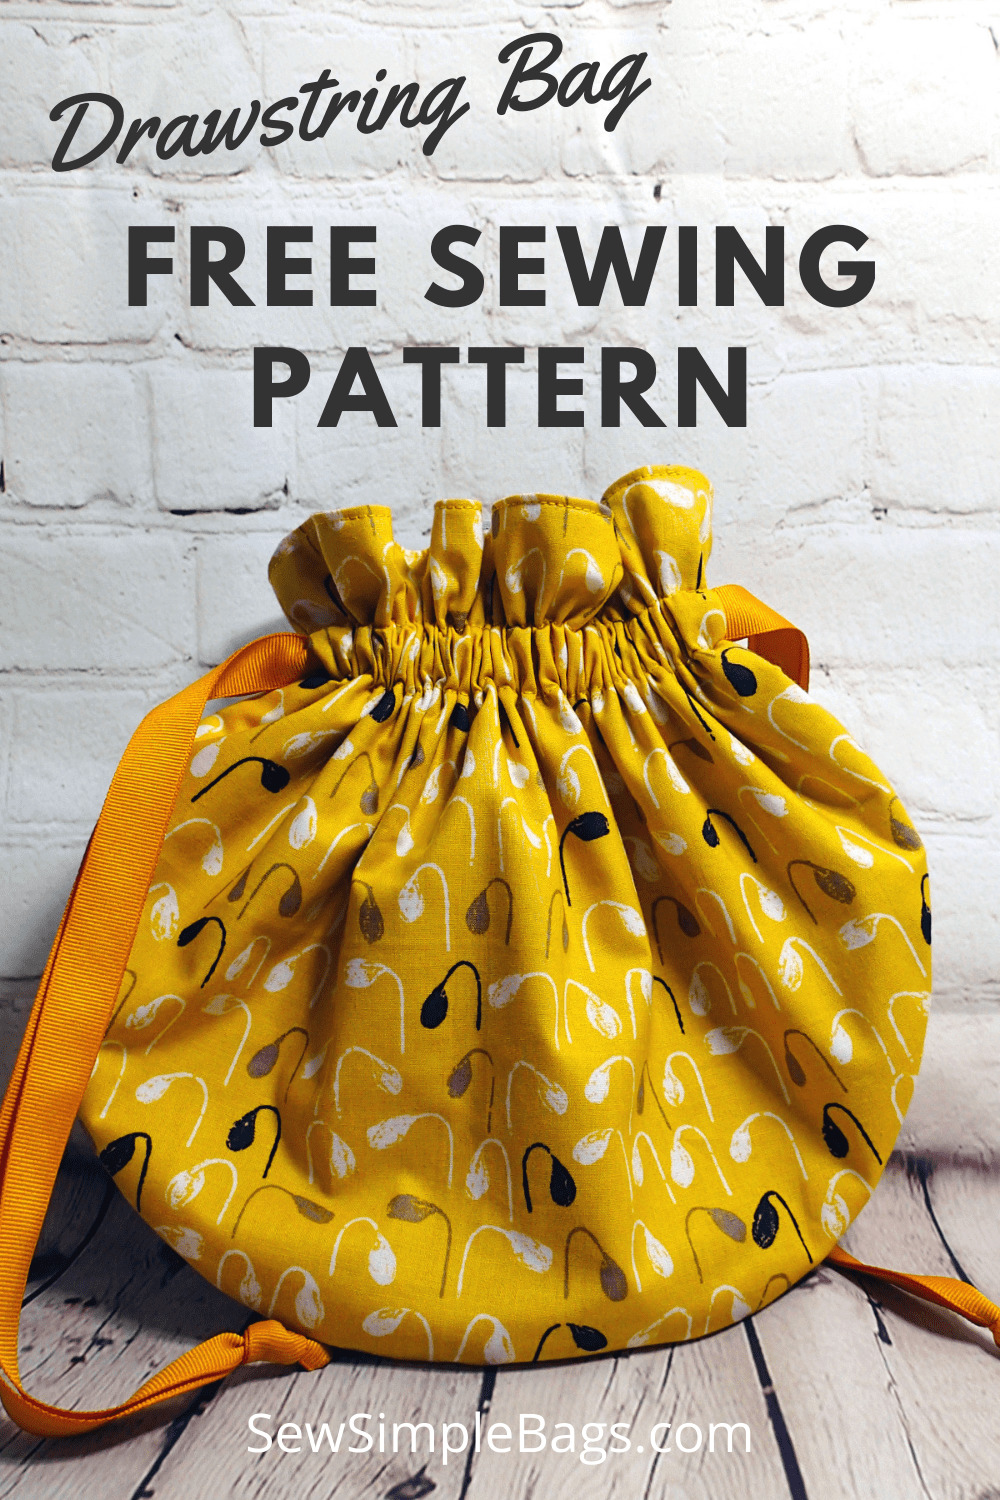 Easy drawstring bag sewing pattern for beginners with video tutorial in three sizes